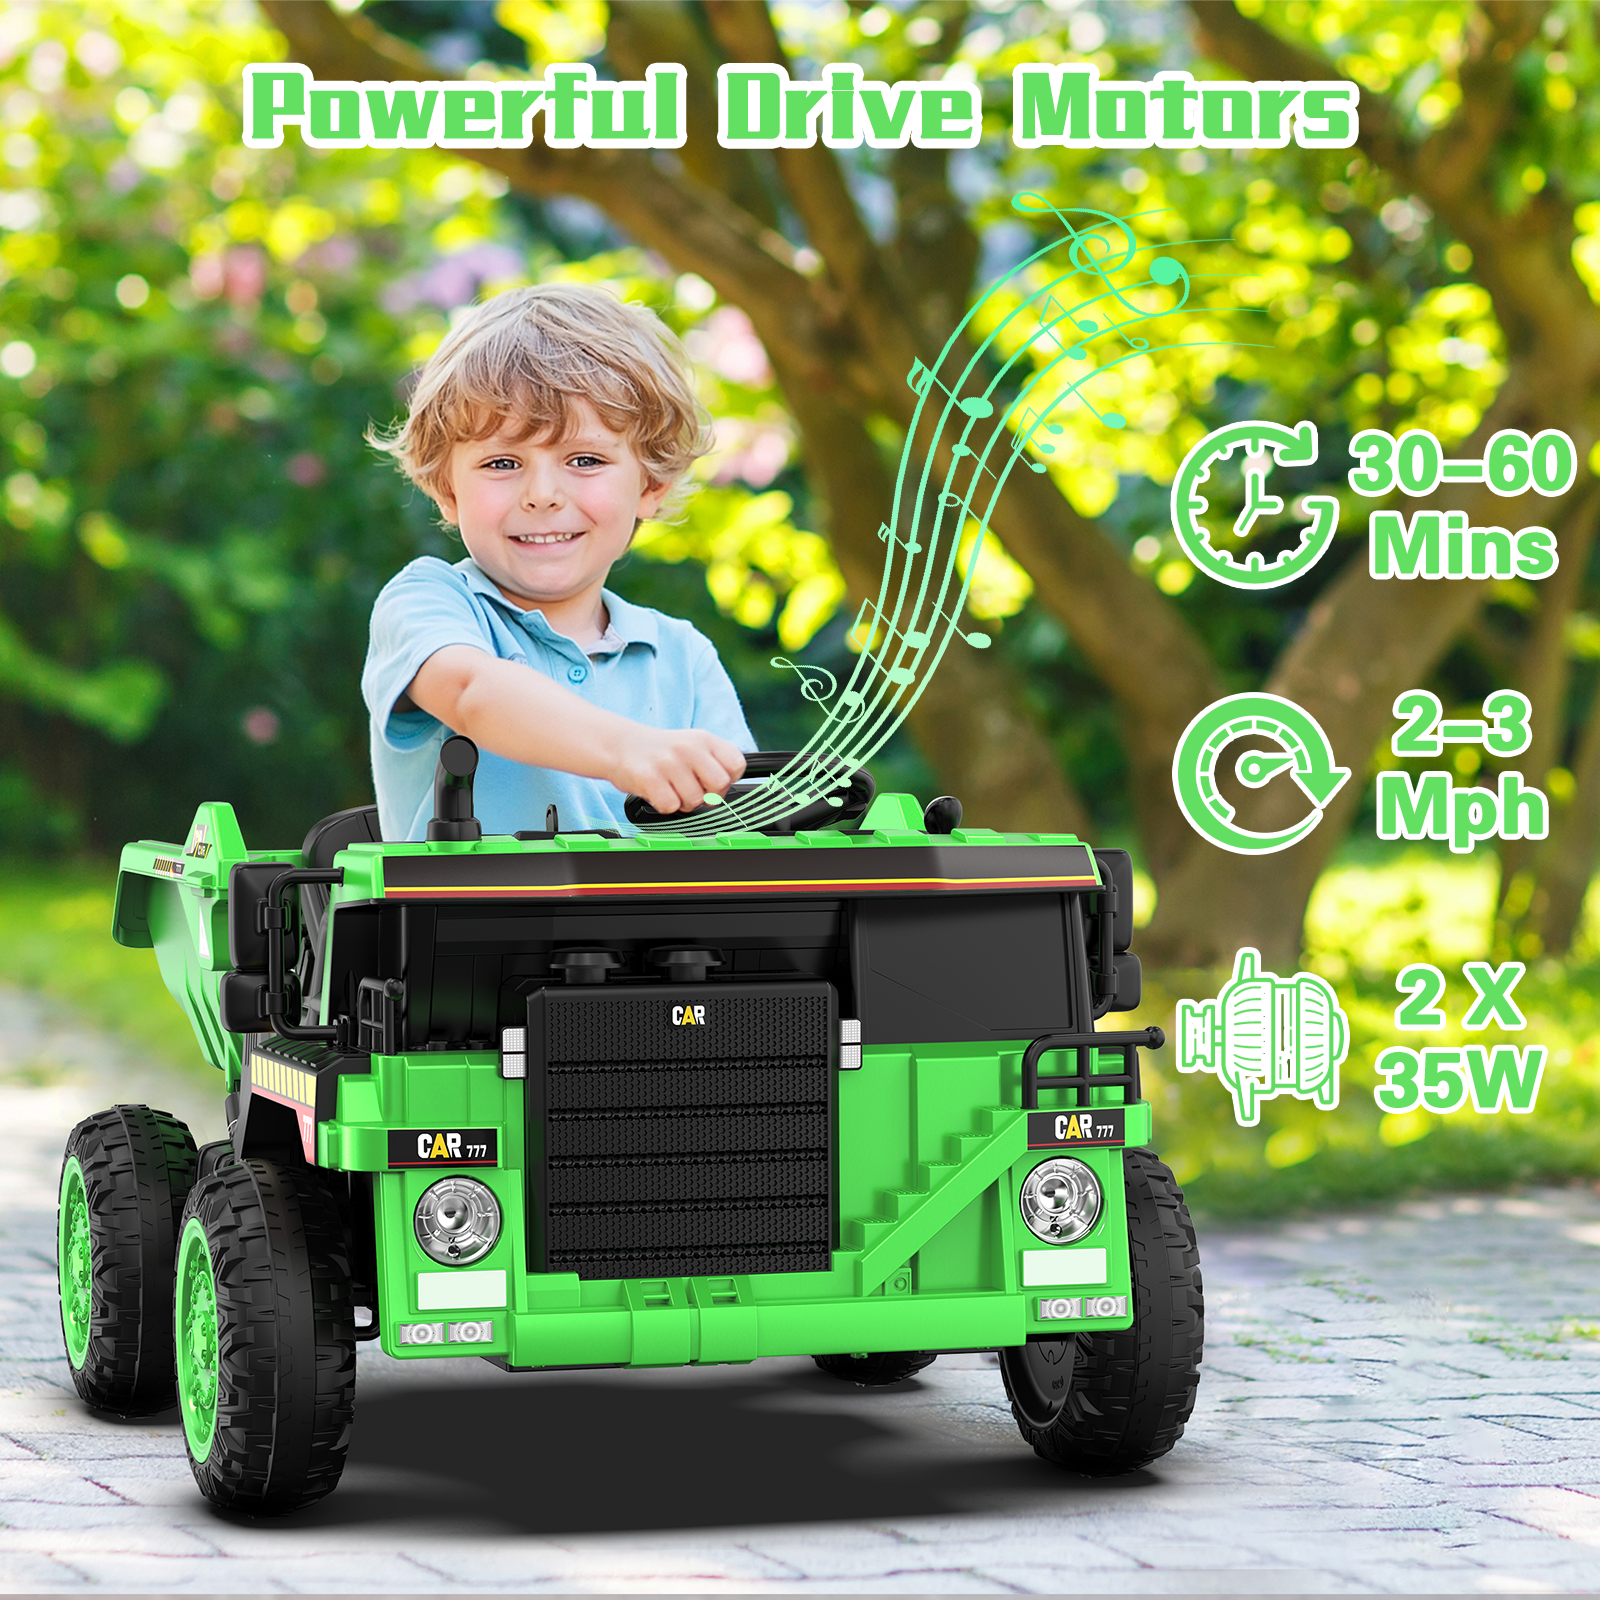 TOKTOO 12Volt Battery Powered Ride on Tractor w/ Remote Control, Music Player, Electric Dump Bed-Green - image 5 of 13